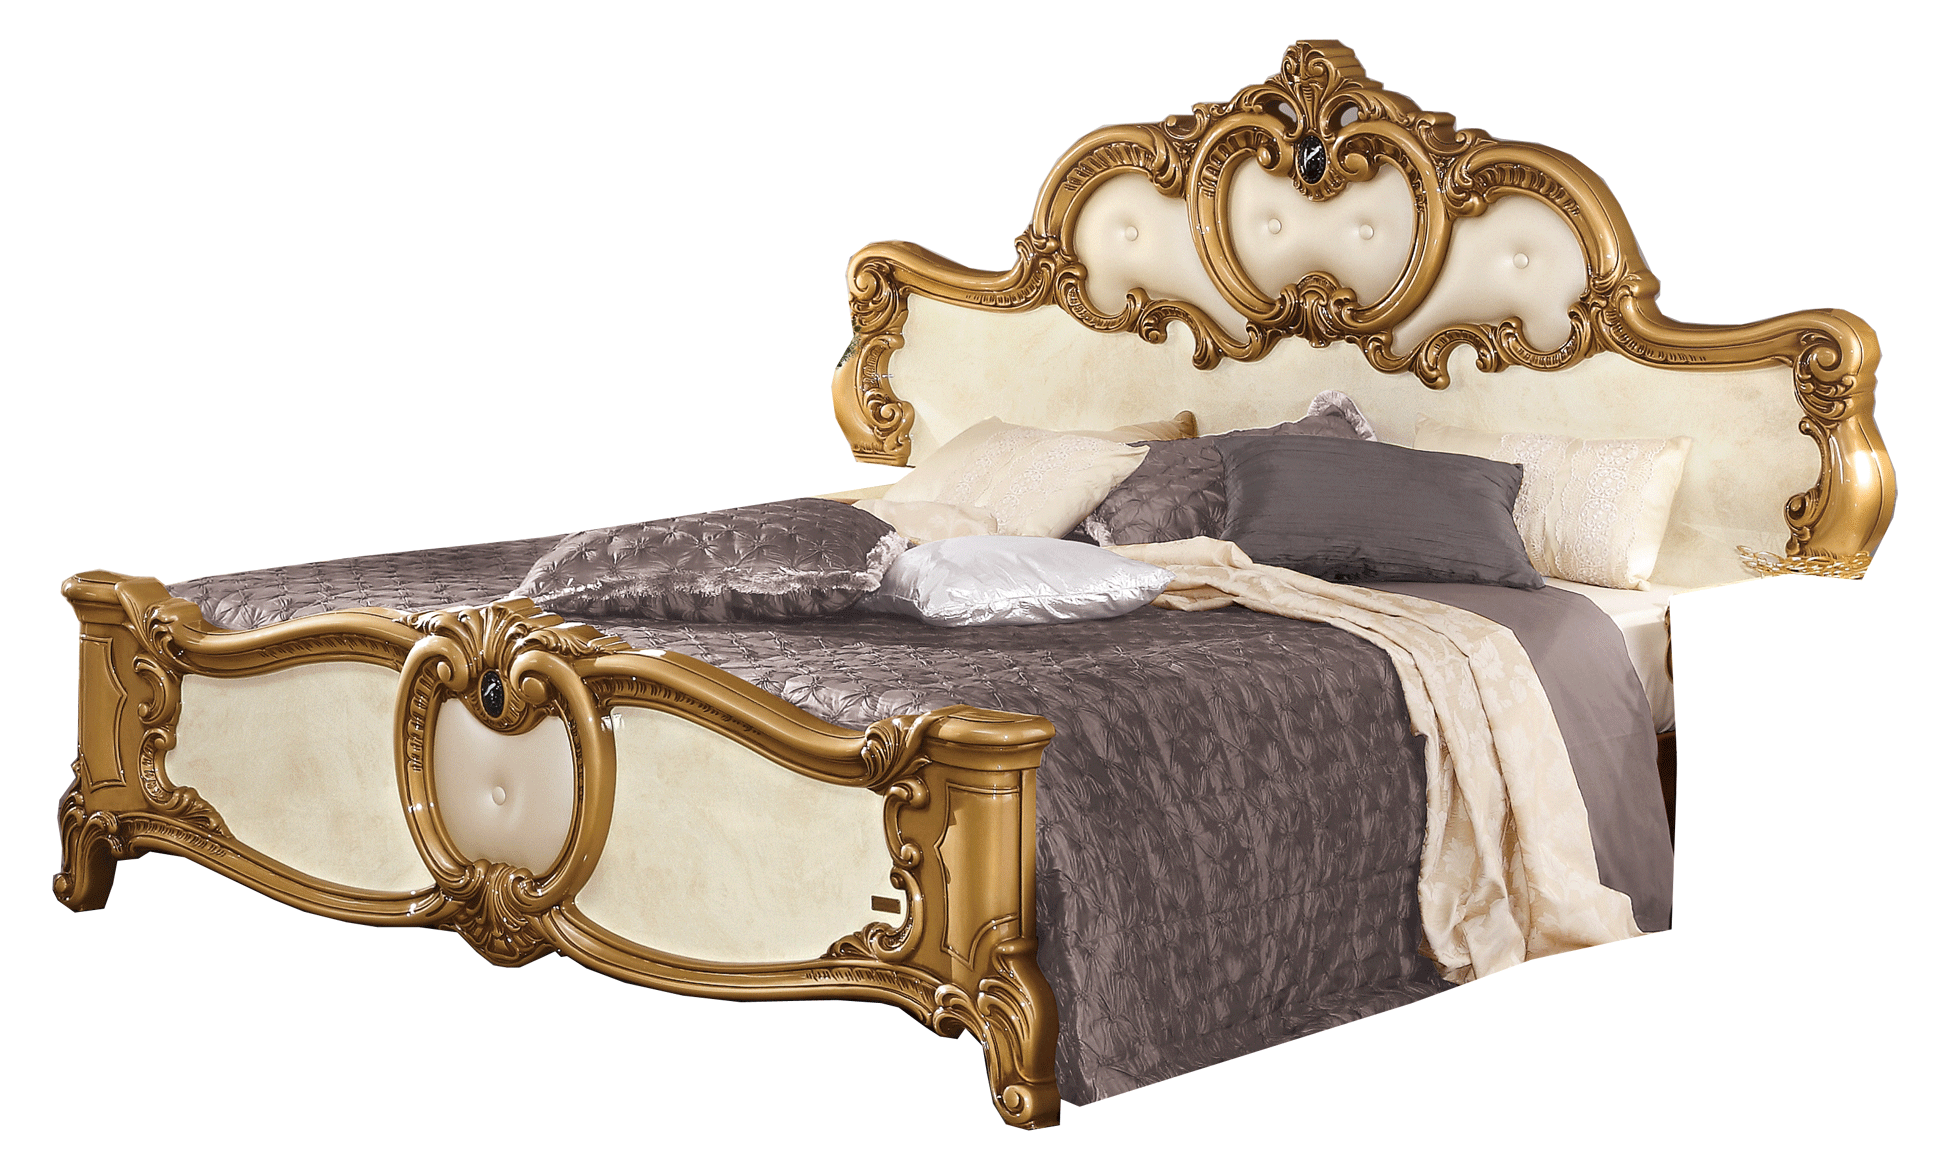 Brands Camel Gold Collection, Italy Barocco Bed Ivory w/Gold, Camelgroup Italy